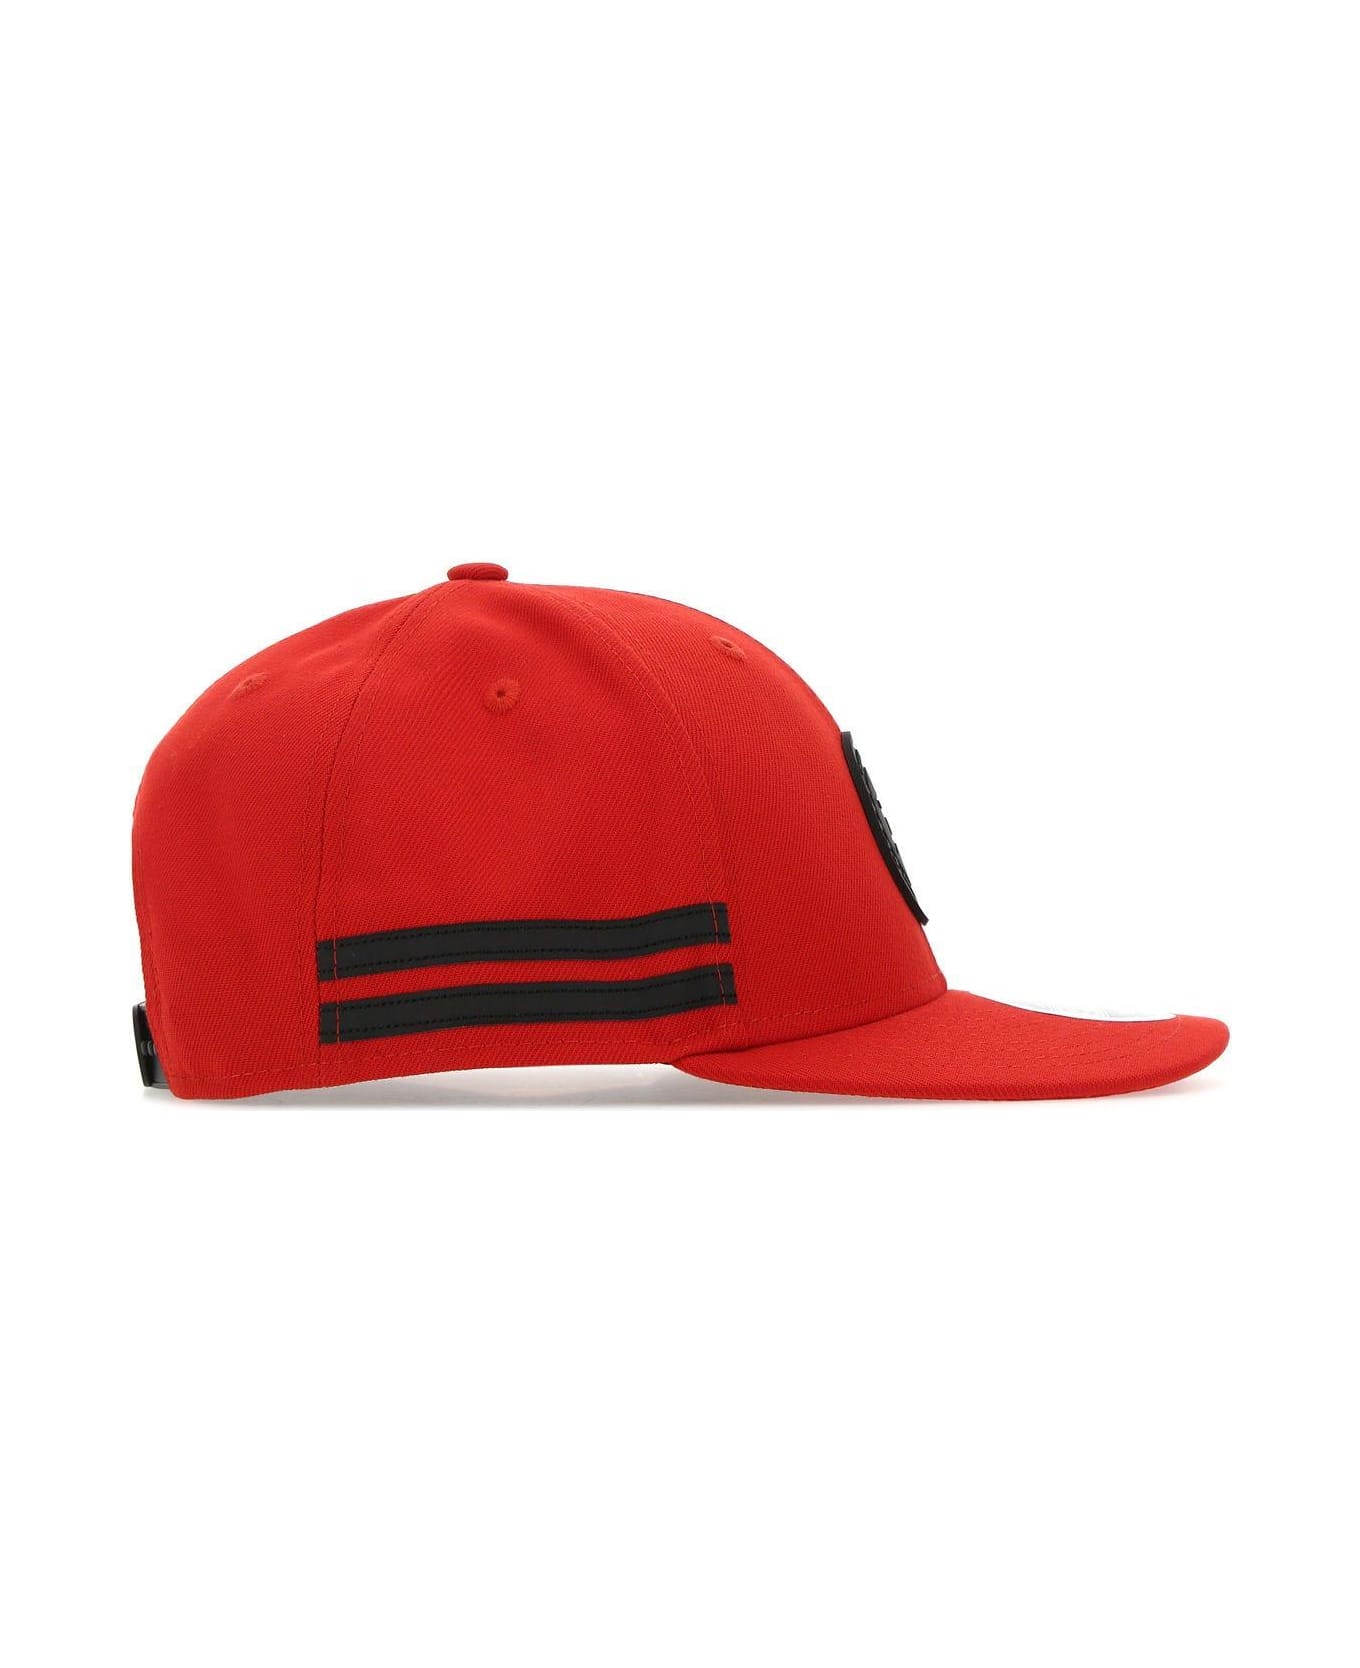 Canada Goose Red Polyester Arctic Baseball Cap - Red